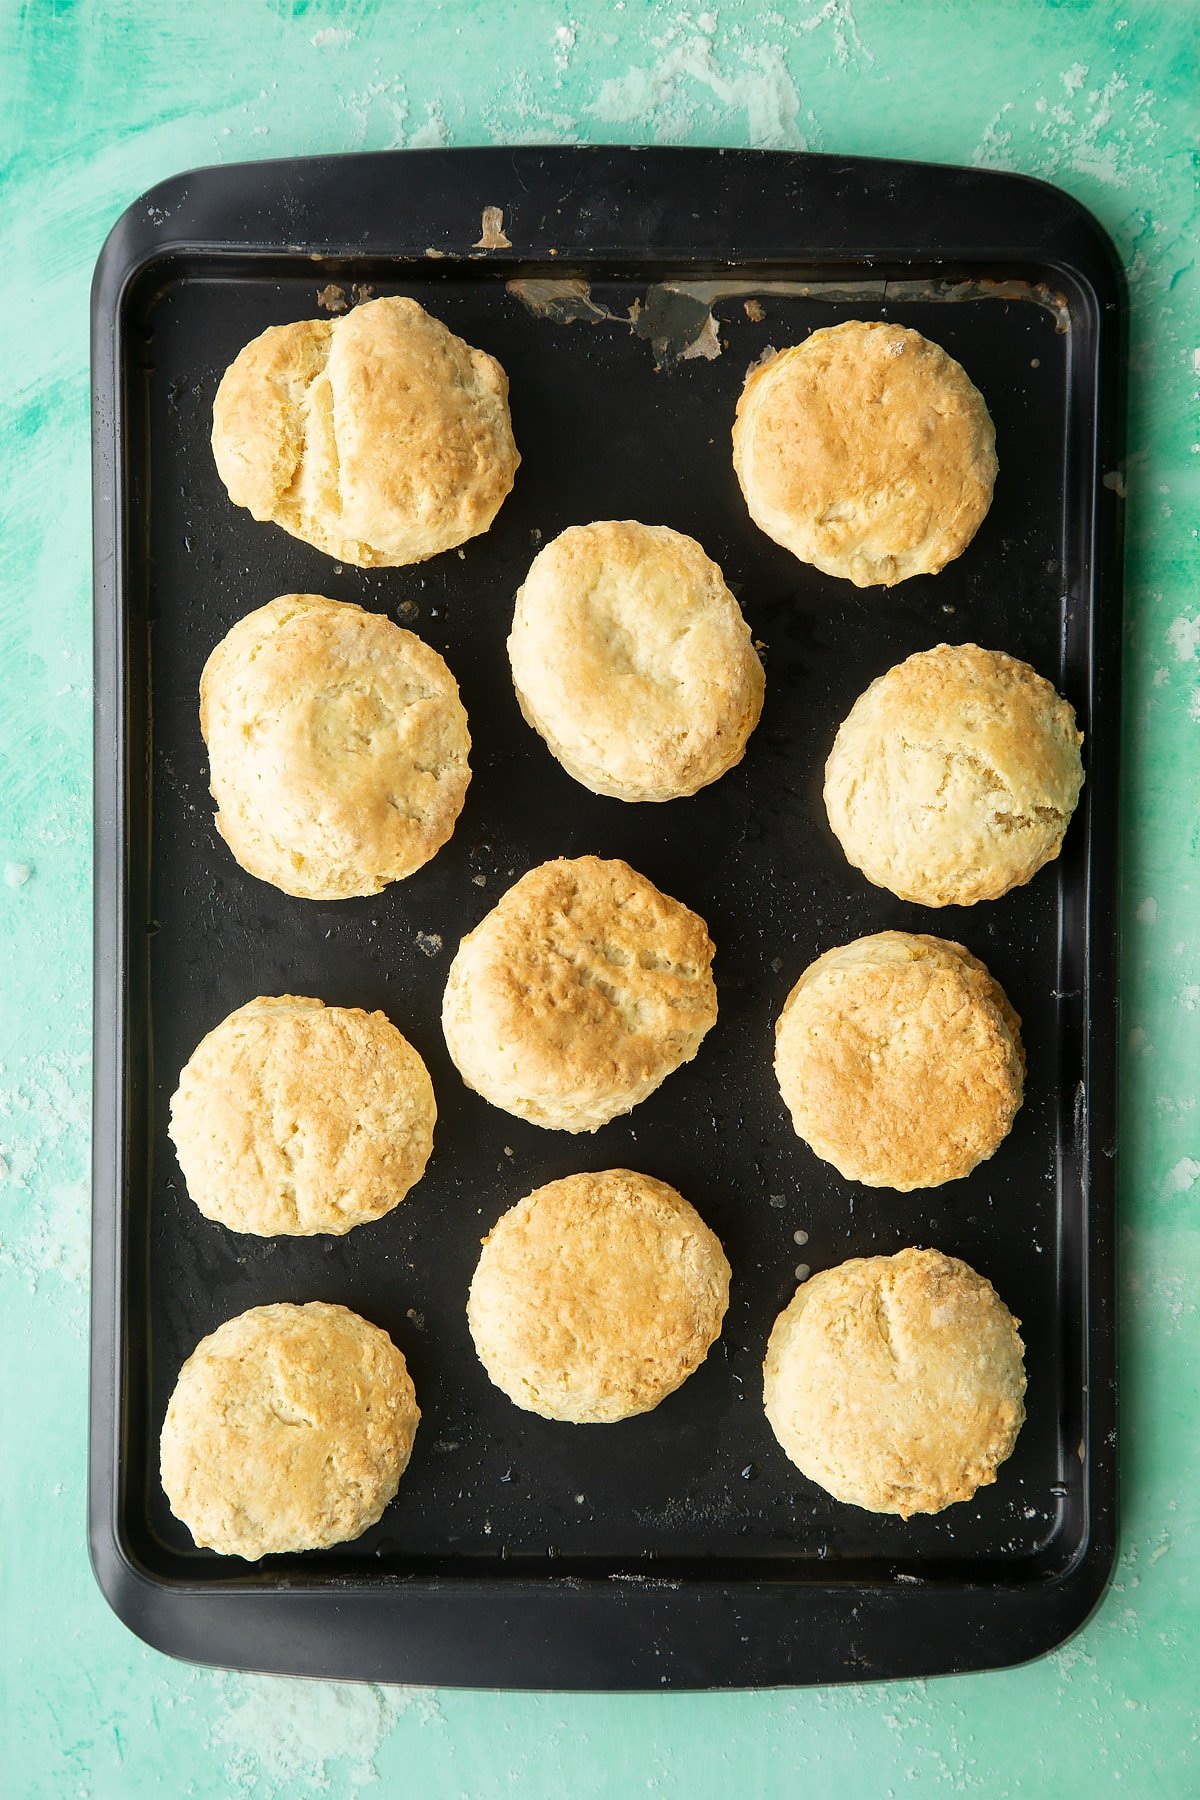 Baked dairy free scones on a baking sheet.